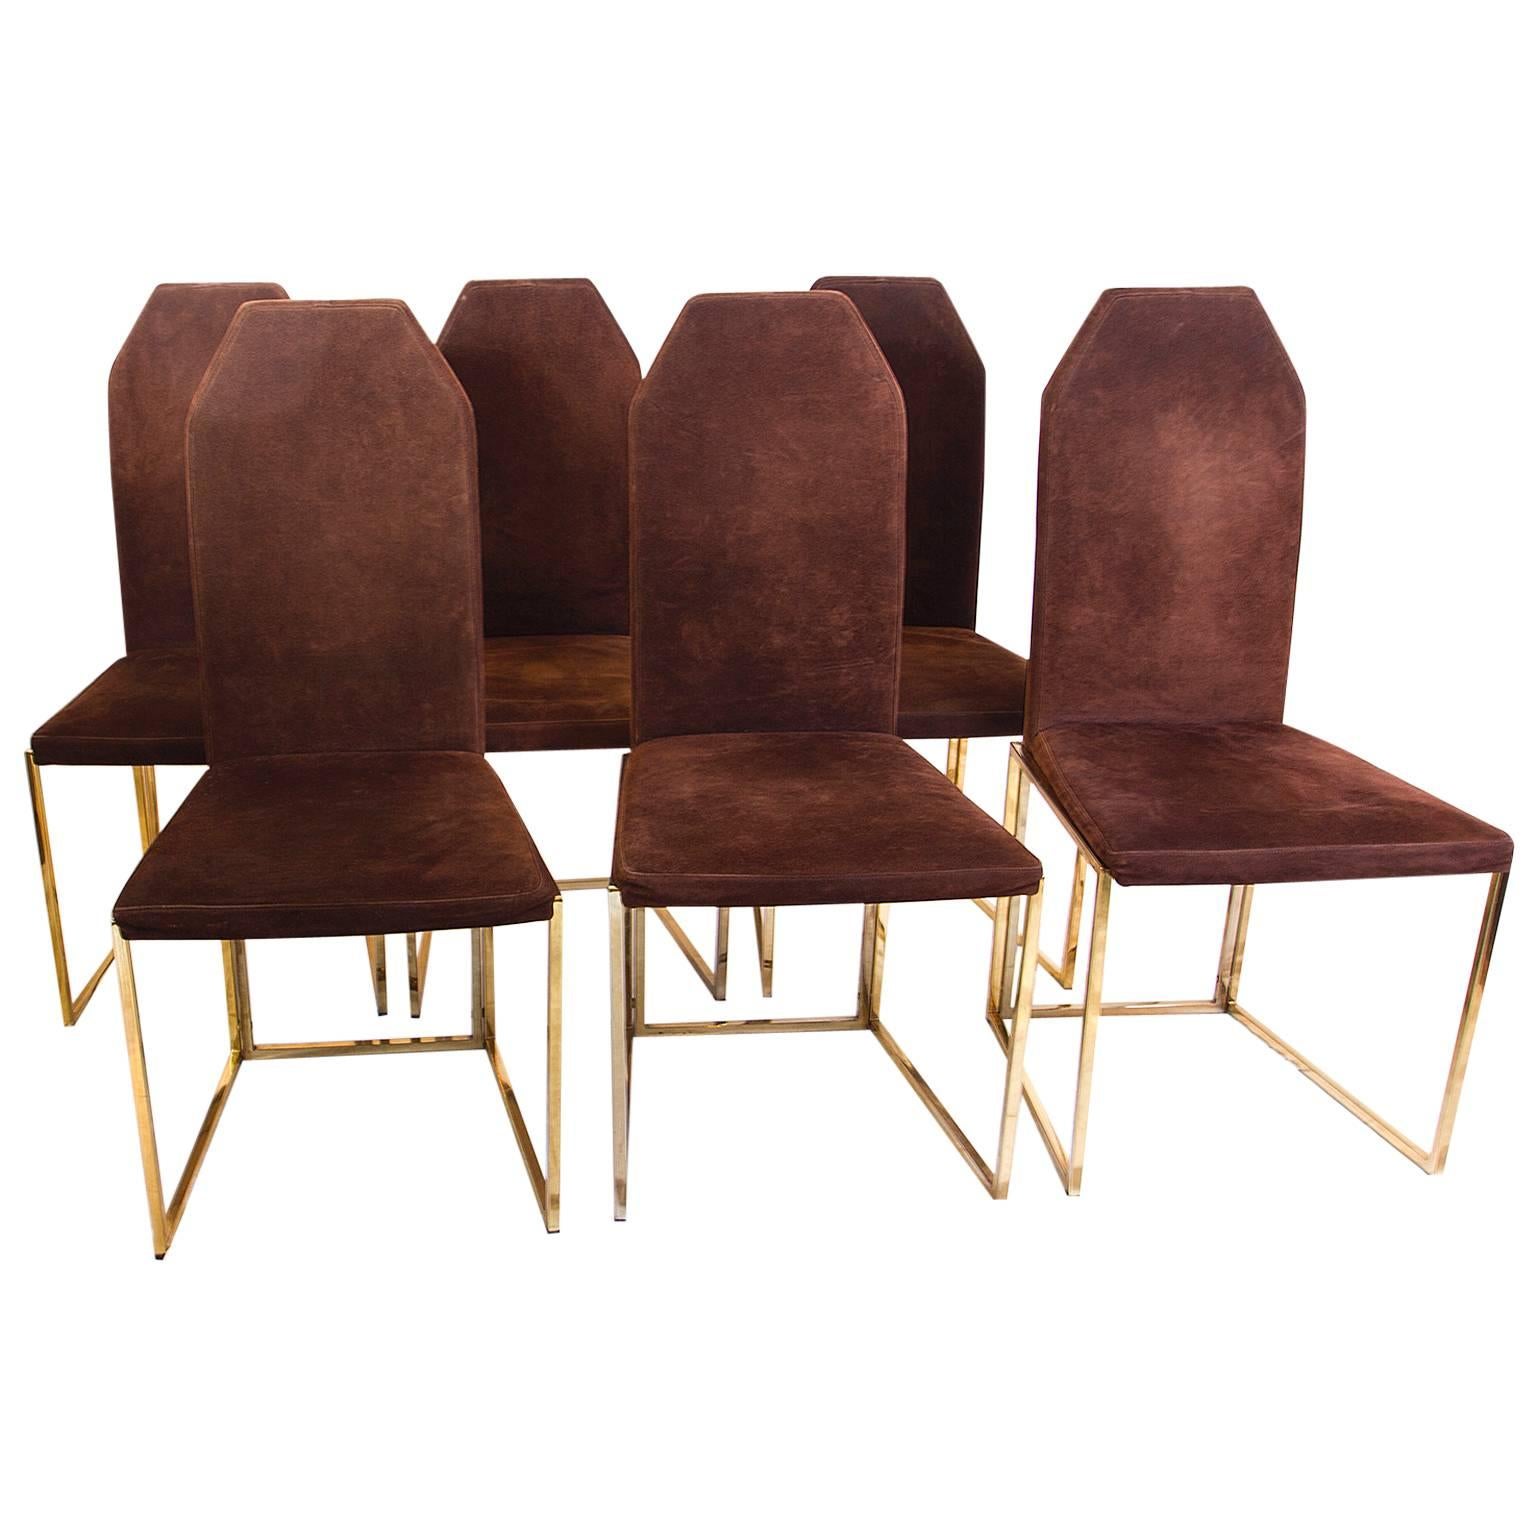 Six Golden Lacquered Steel and Suede Chairs by Belgo Chrome